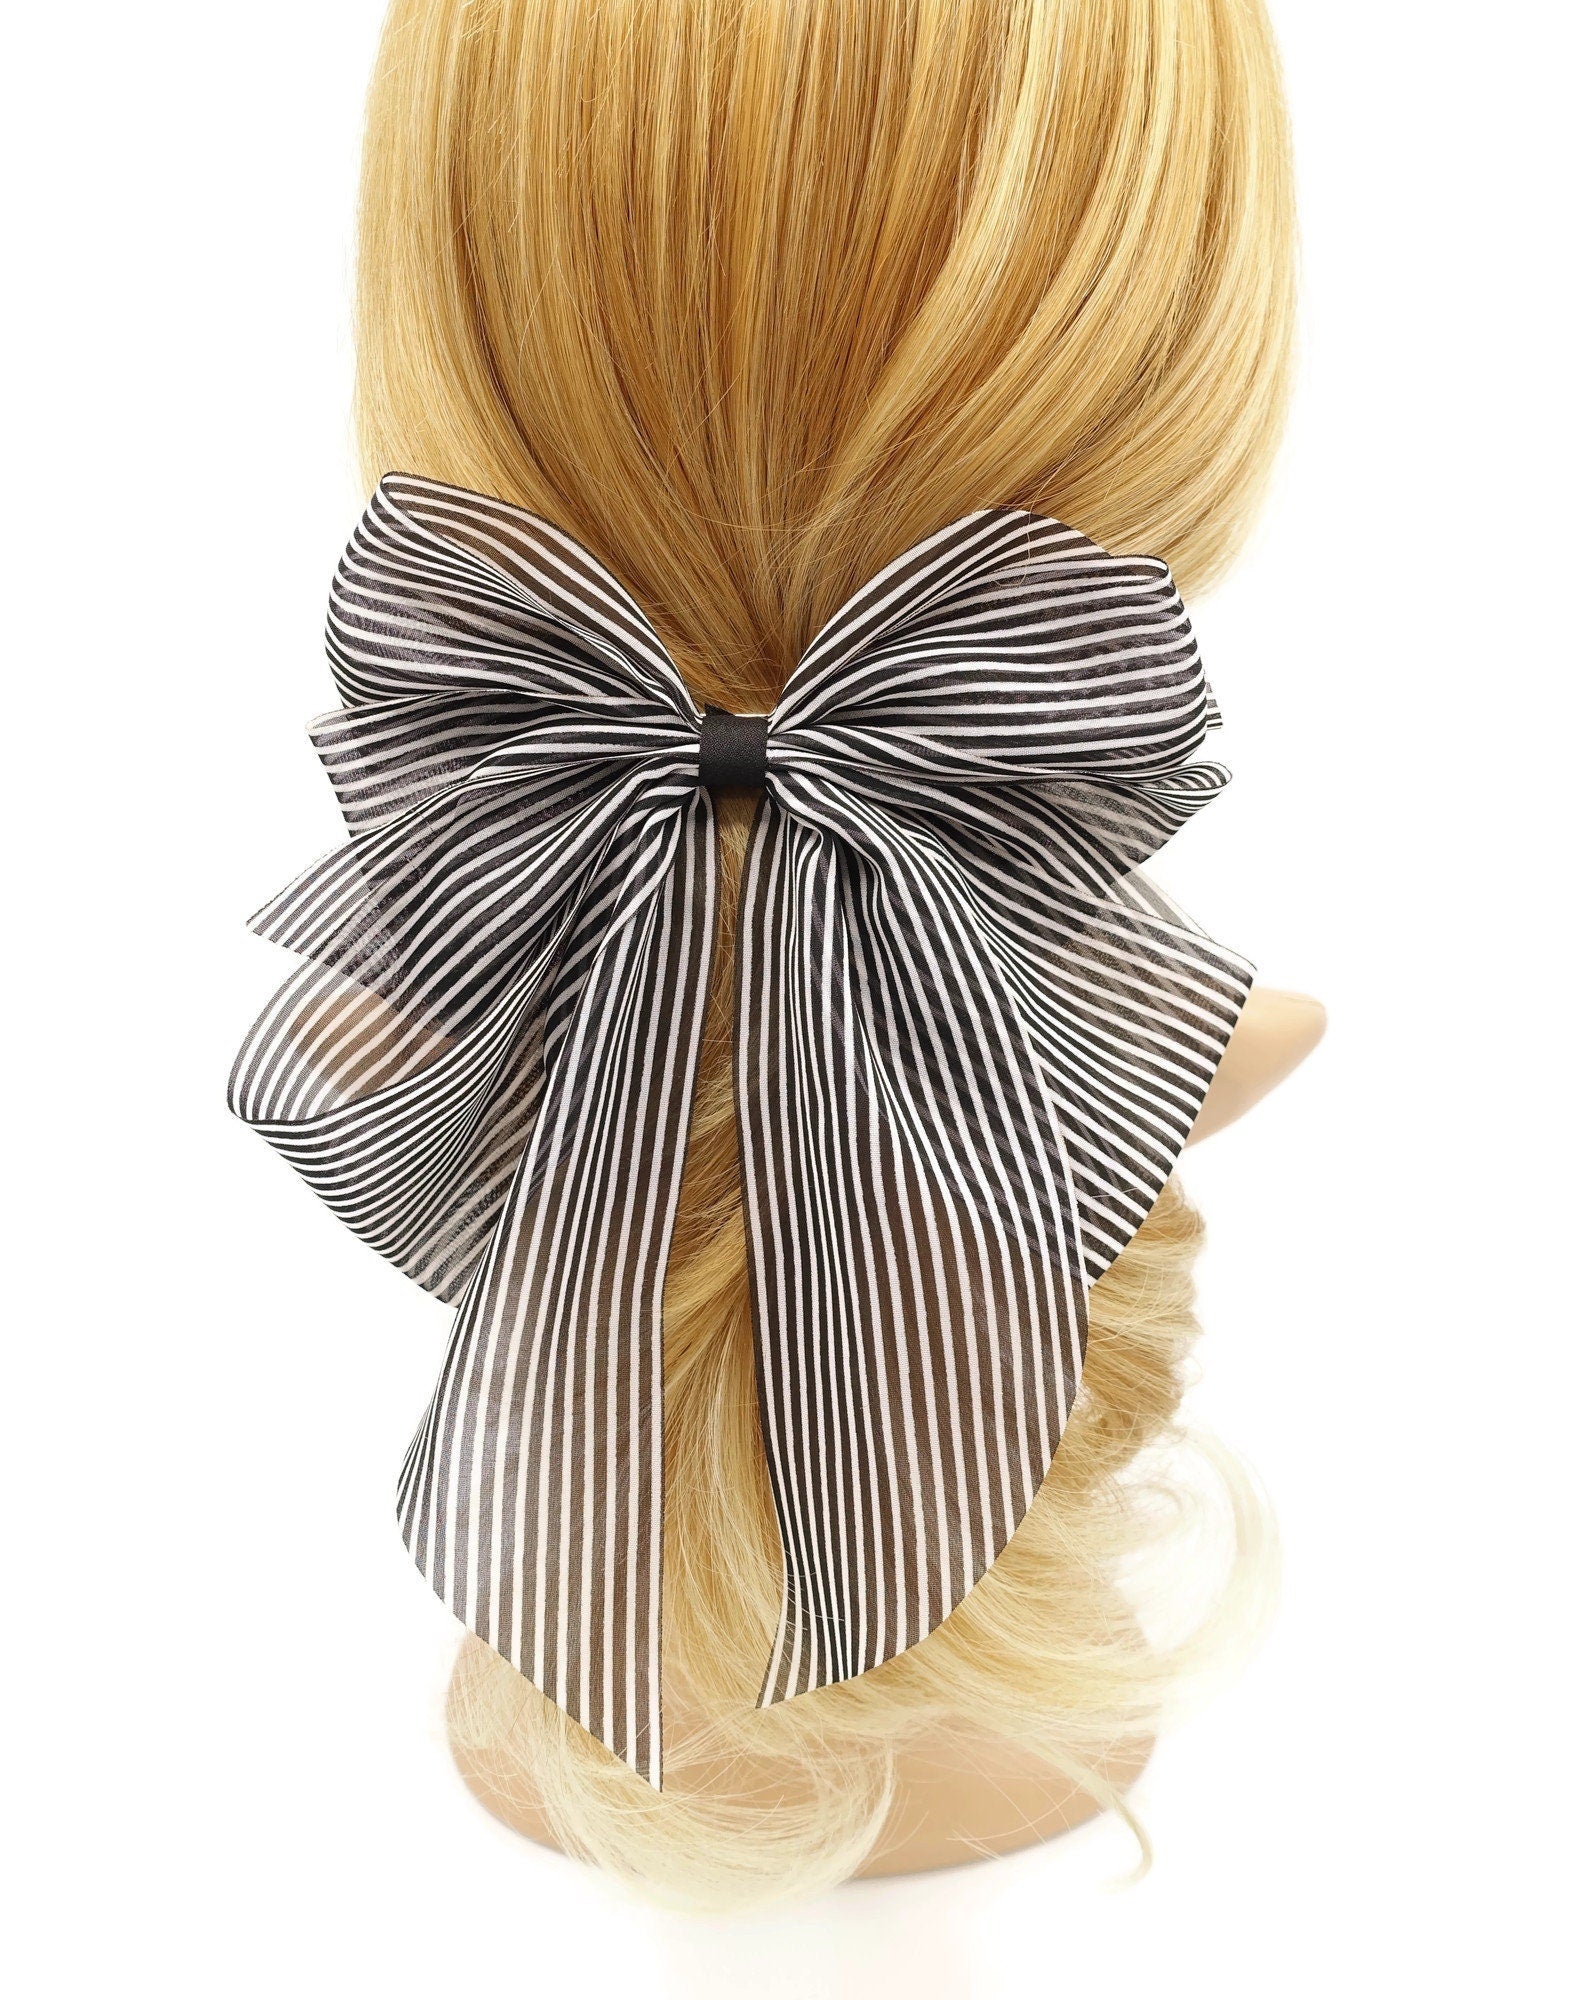 VeryShine Barrette (Bow) Black narrow stripe hair bow layered style tail hair accessory for women